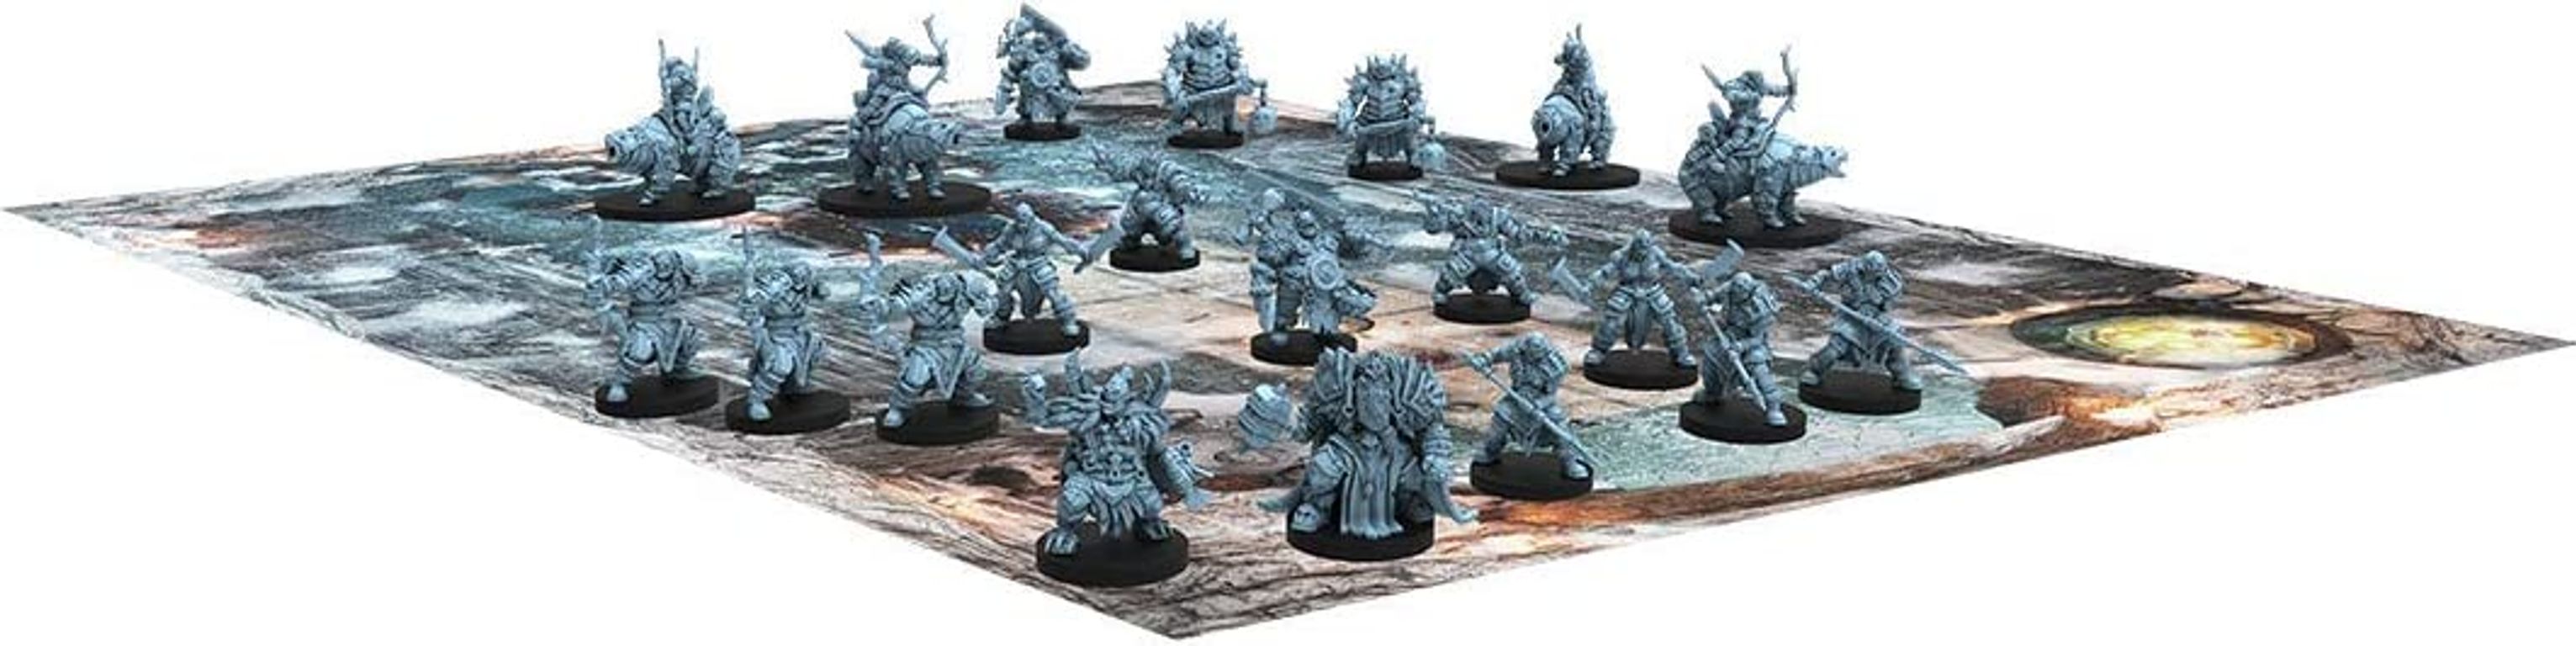 Hall of the Orc King components